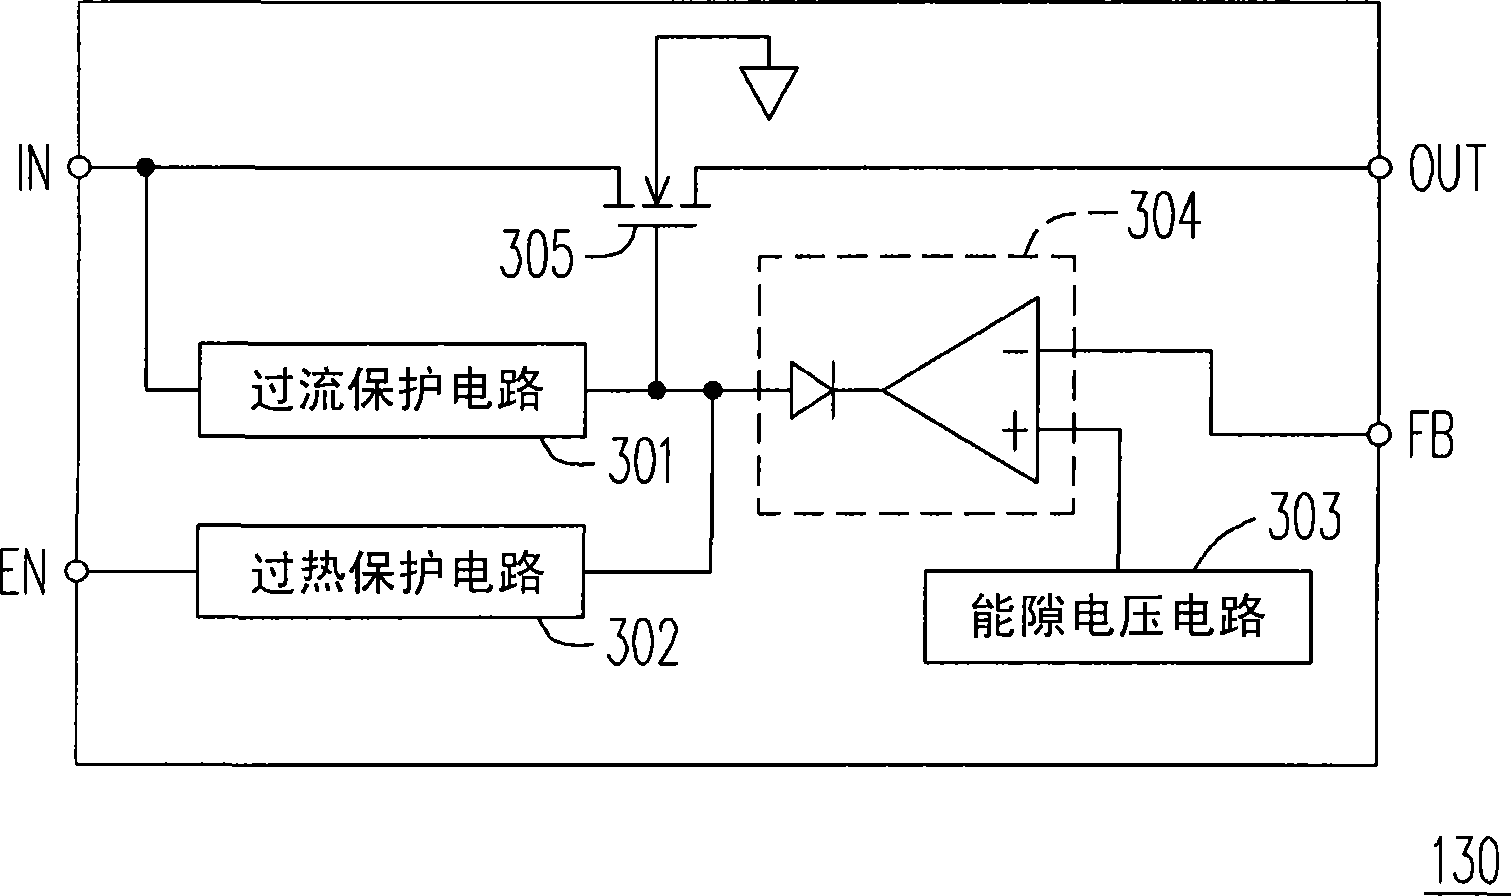 Voltage conversion device with soft startup function